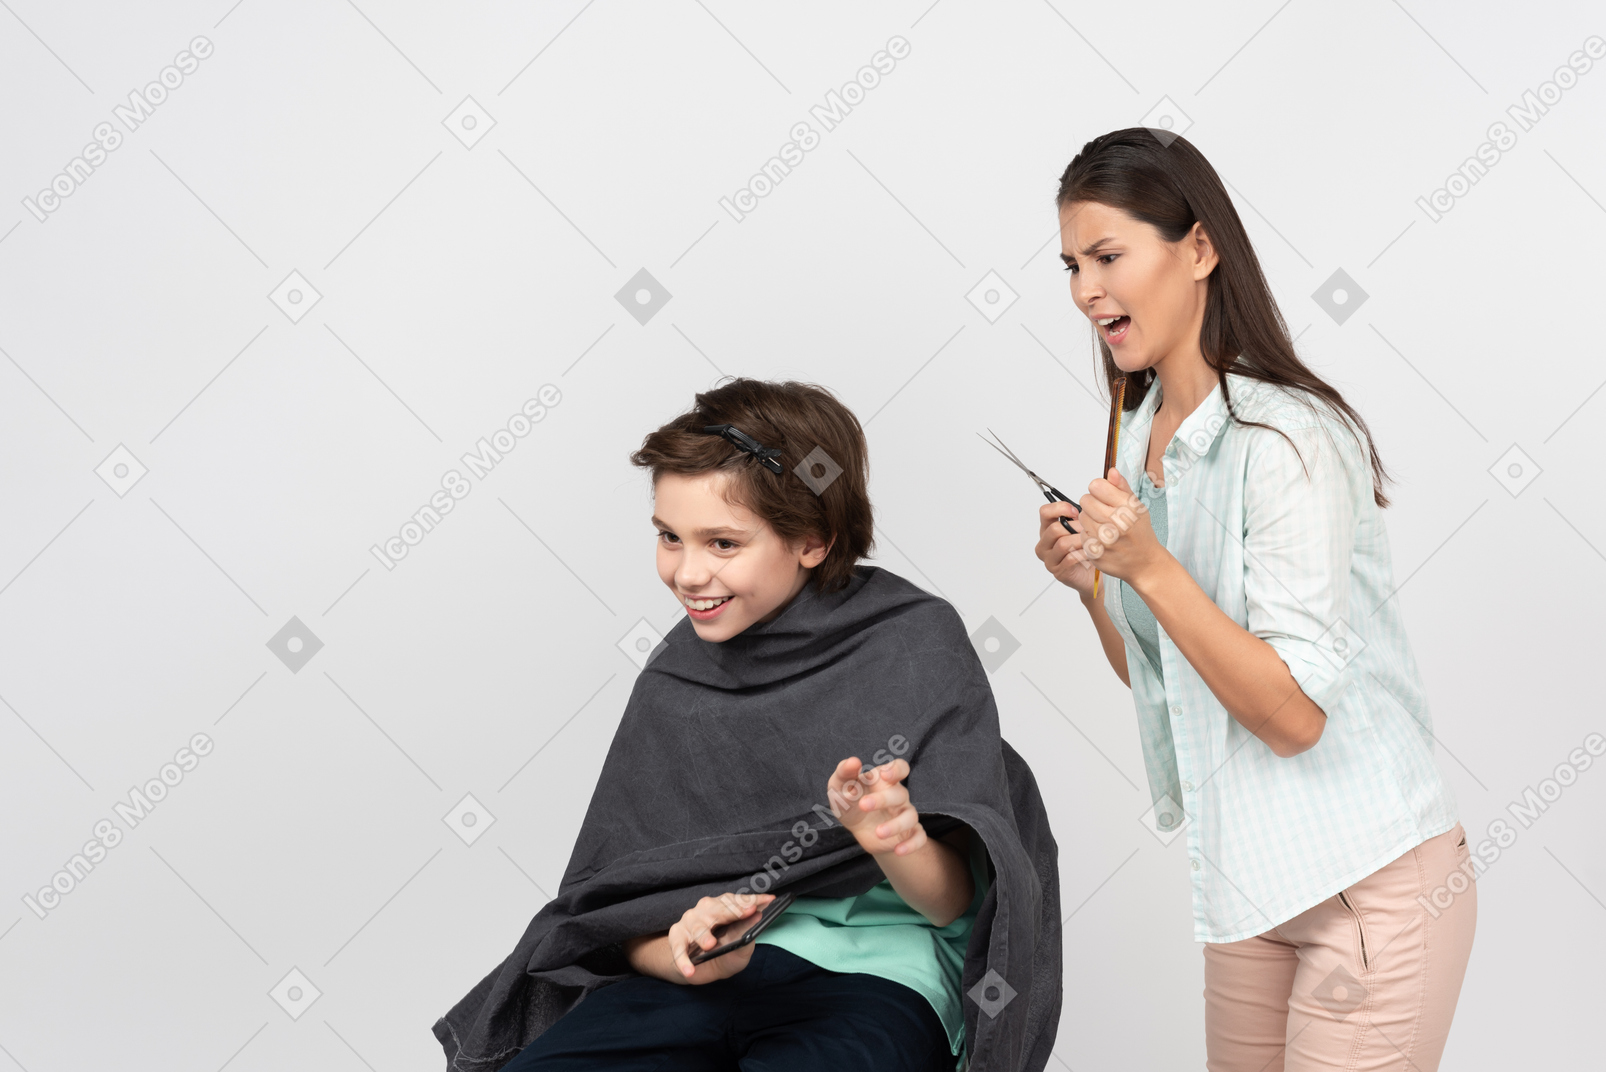 Angry hairdresser shouting at a young customer